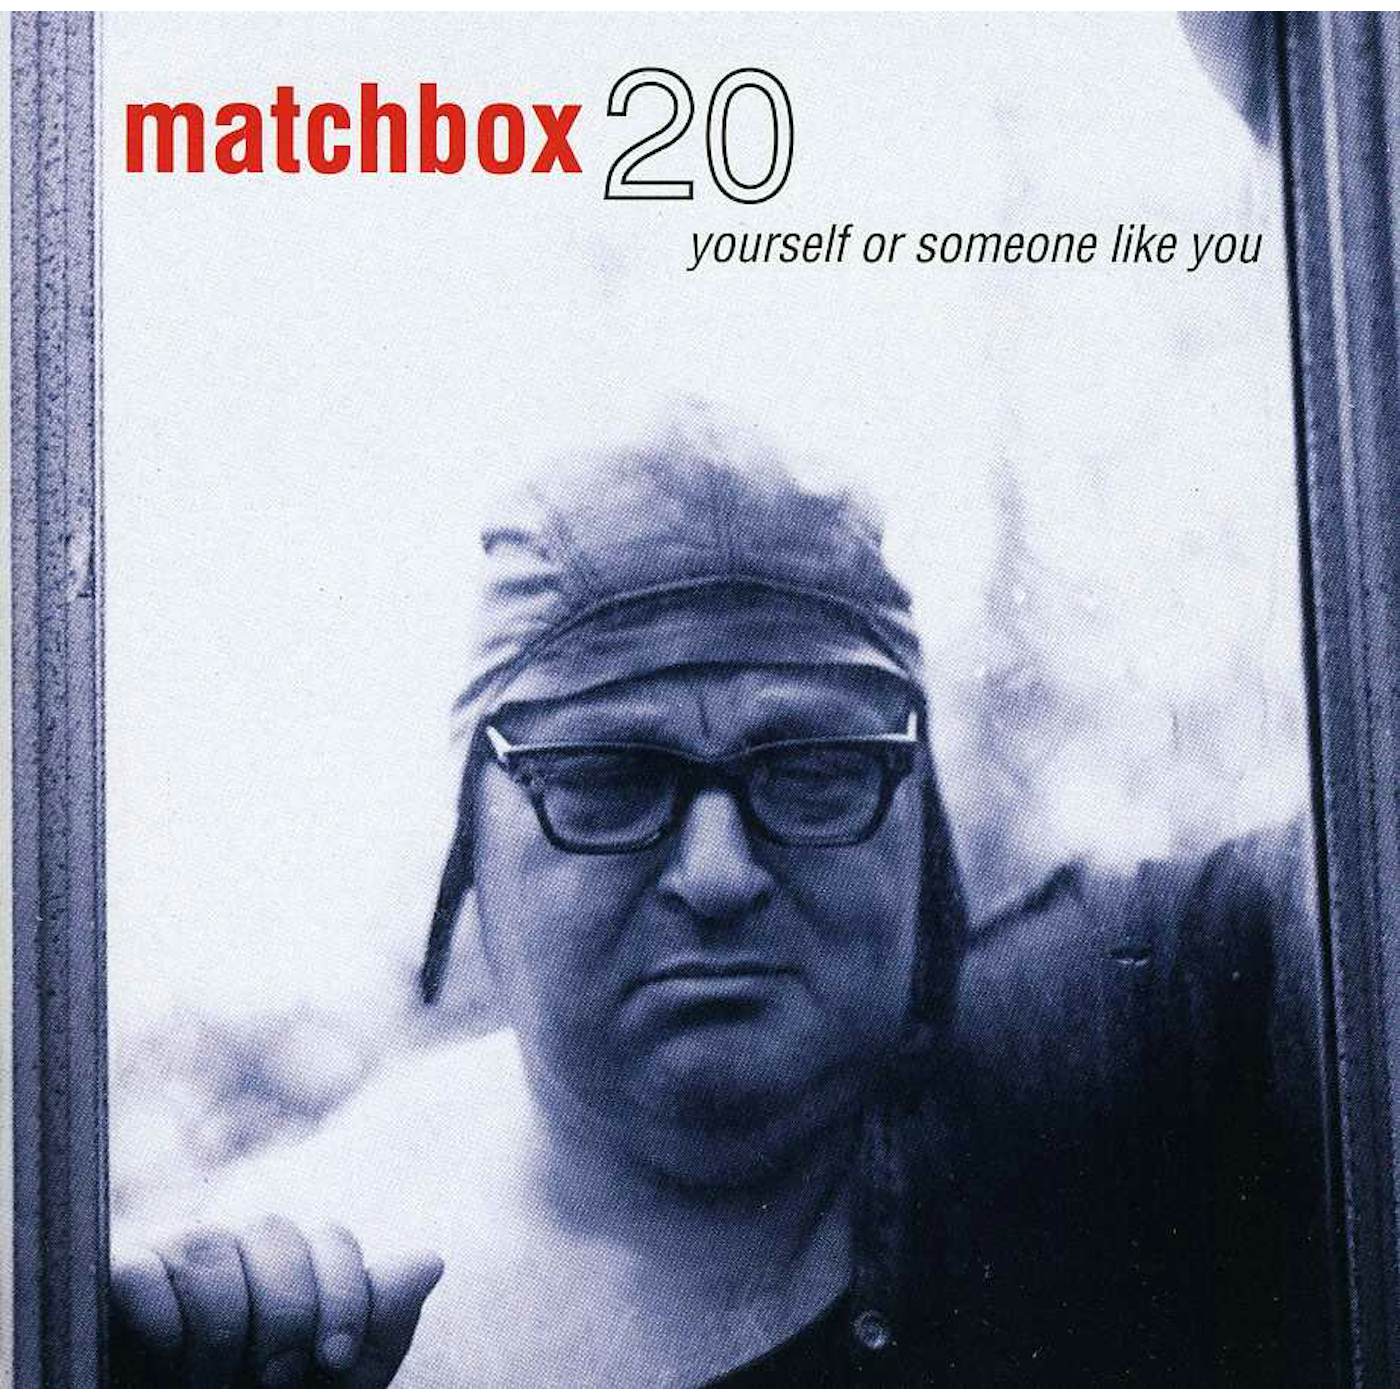 Matchbox 20 YOURSELF OR SOMEONE LIKE YOU CD